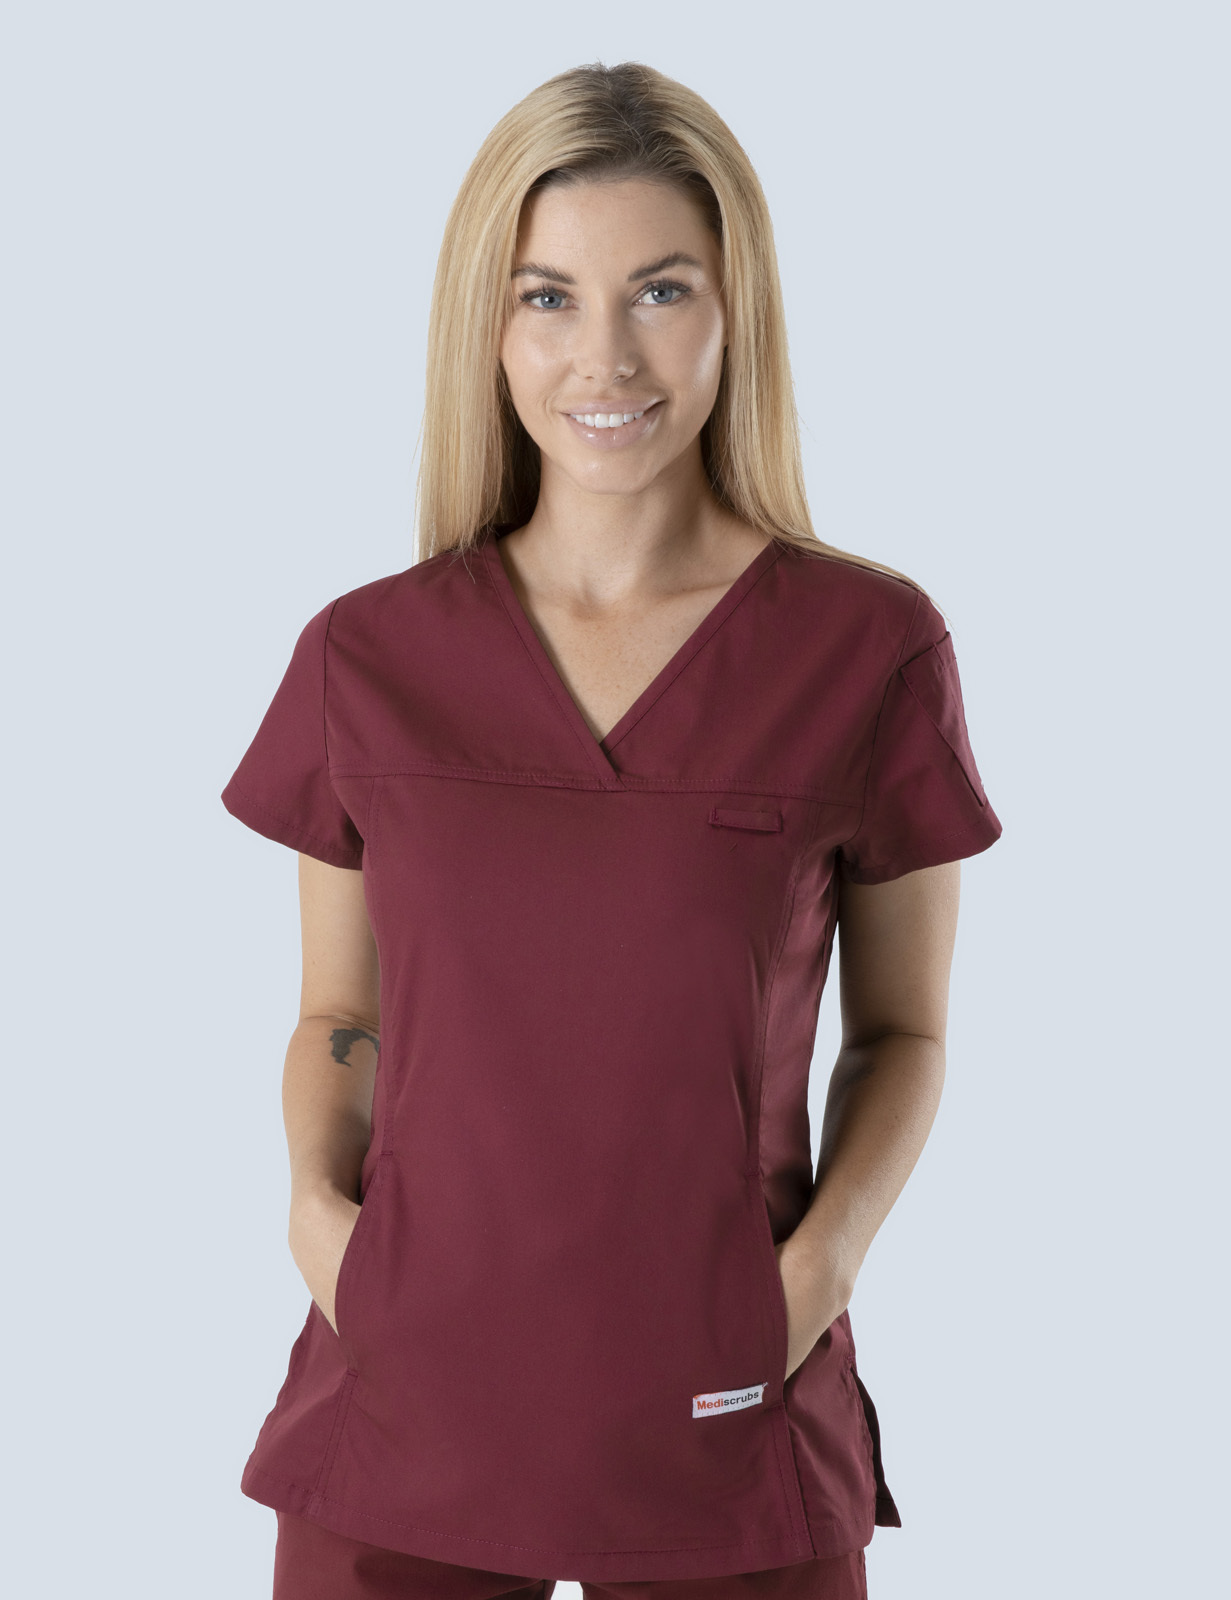 Women's Fit Solid Scrub Top - Burgundy - Large